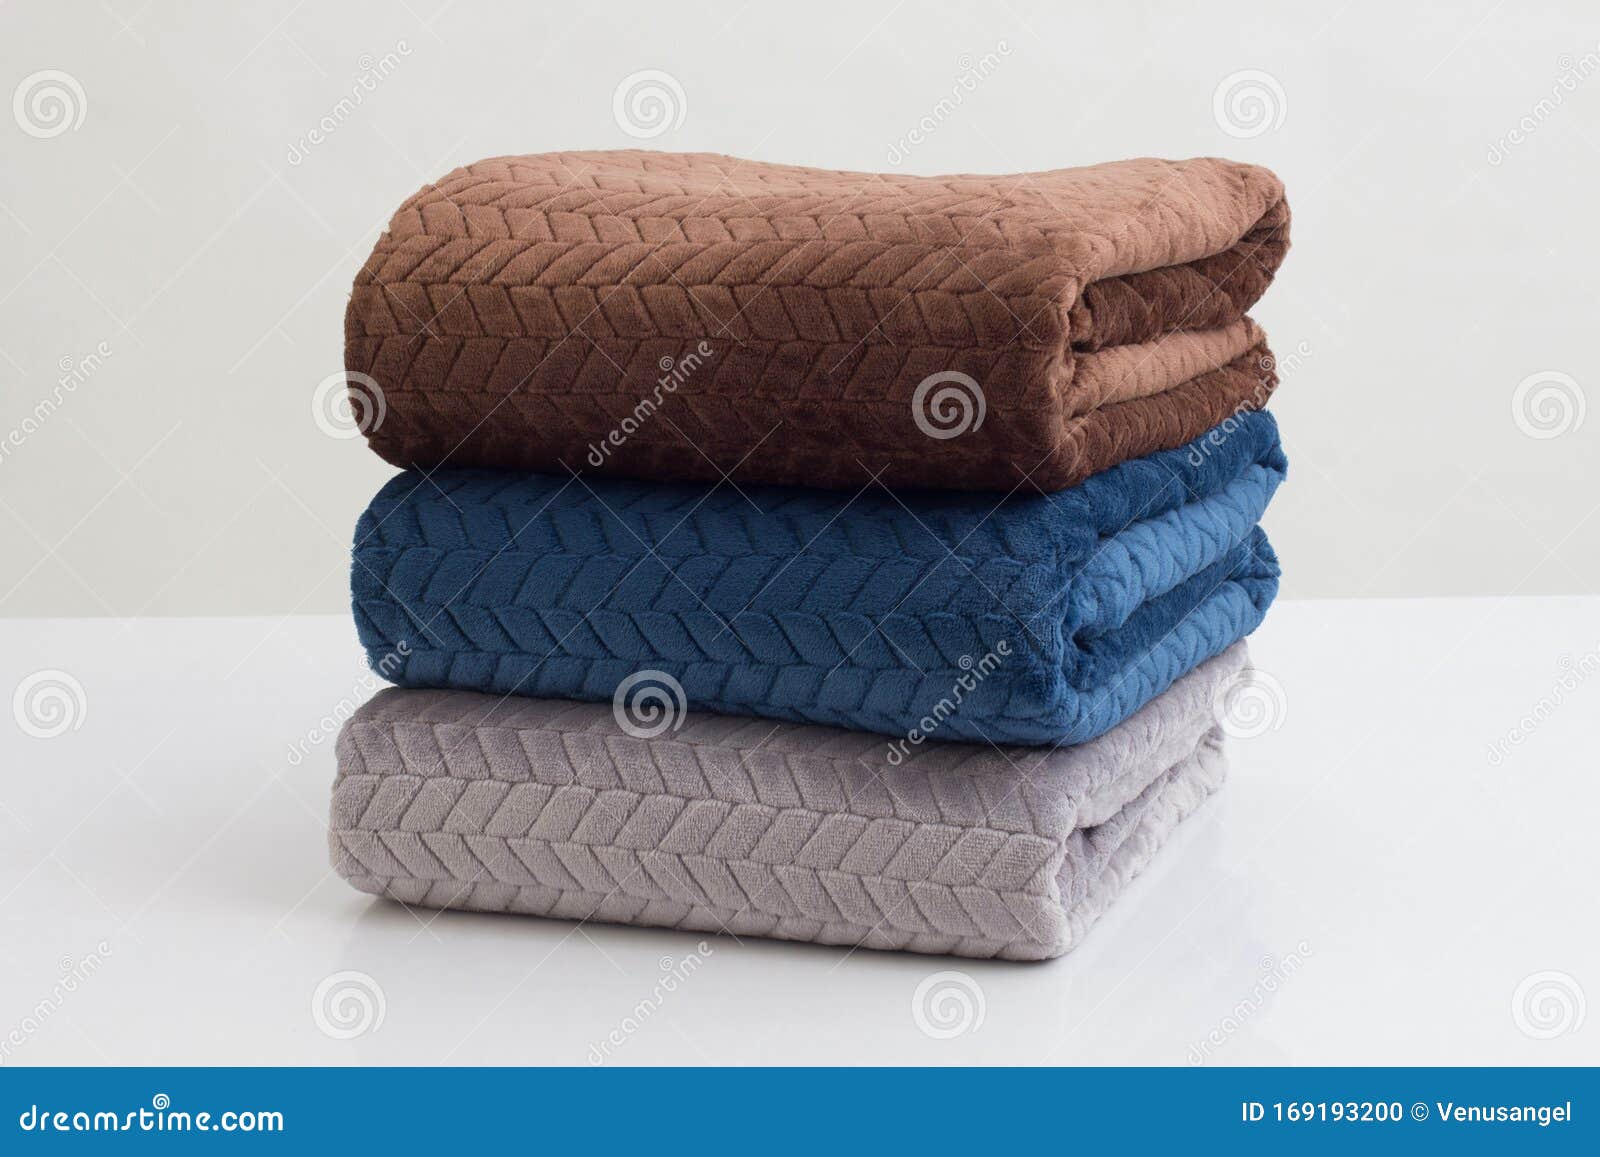 stack of folded soft blankets 